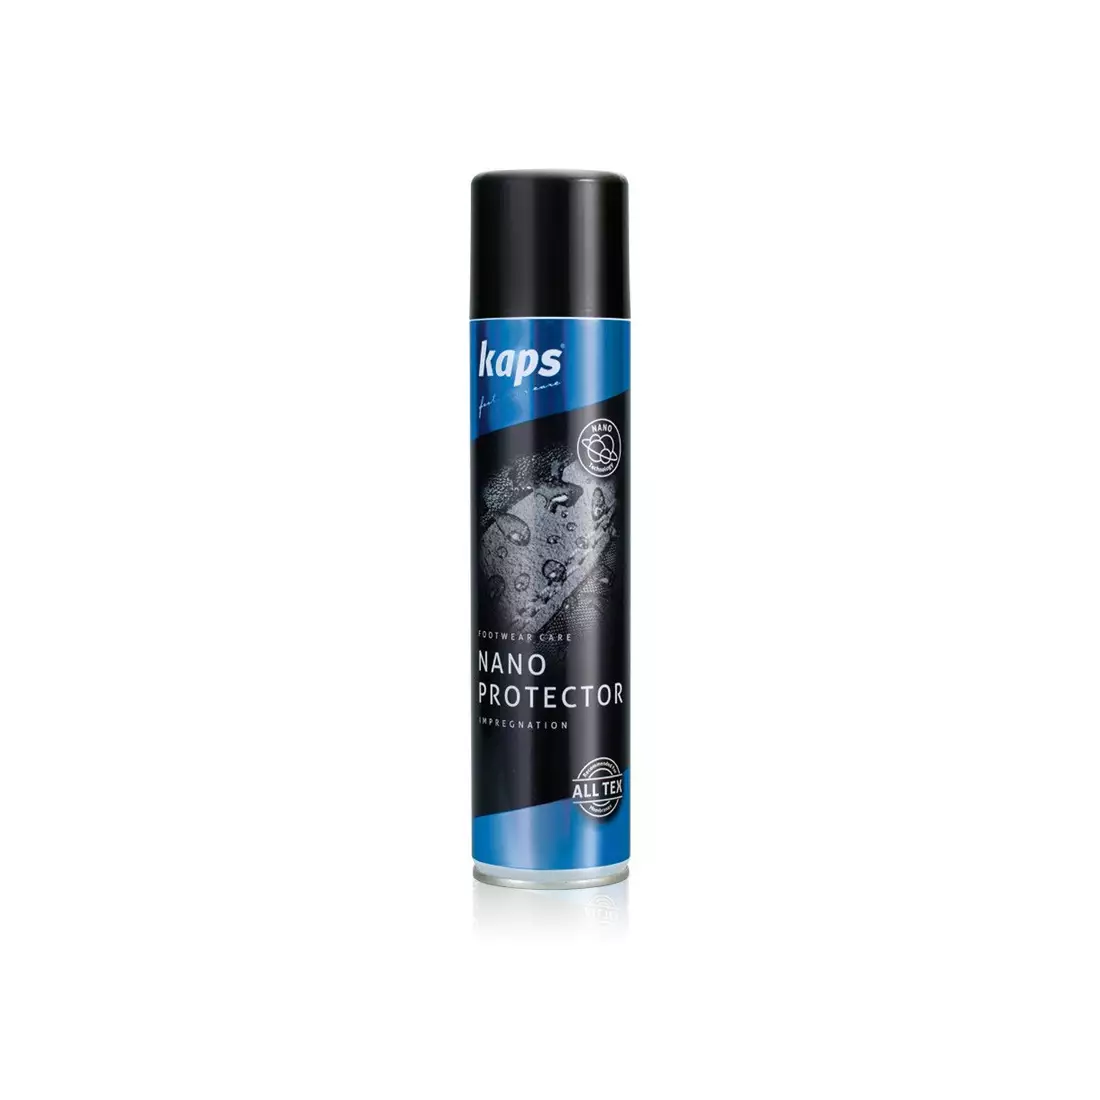 KAPS NANO PROTECTOR - impregnation for leather and textiles with Nano particles - capacity 400 ml